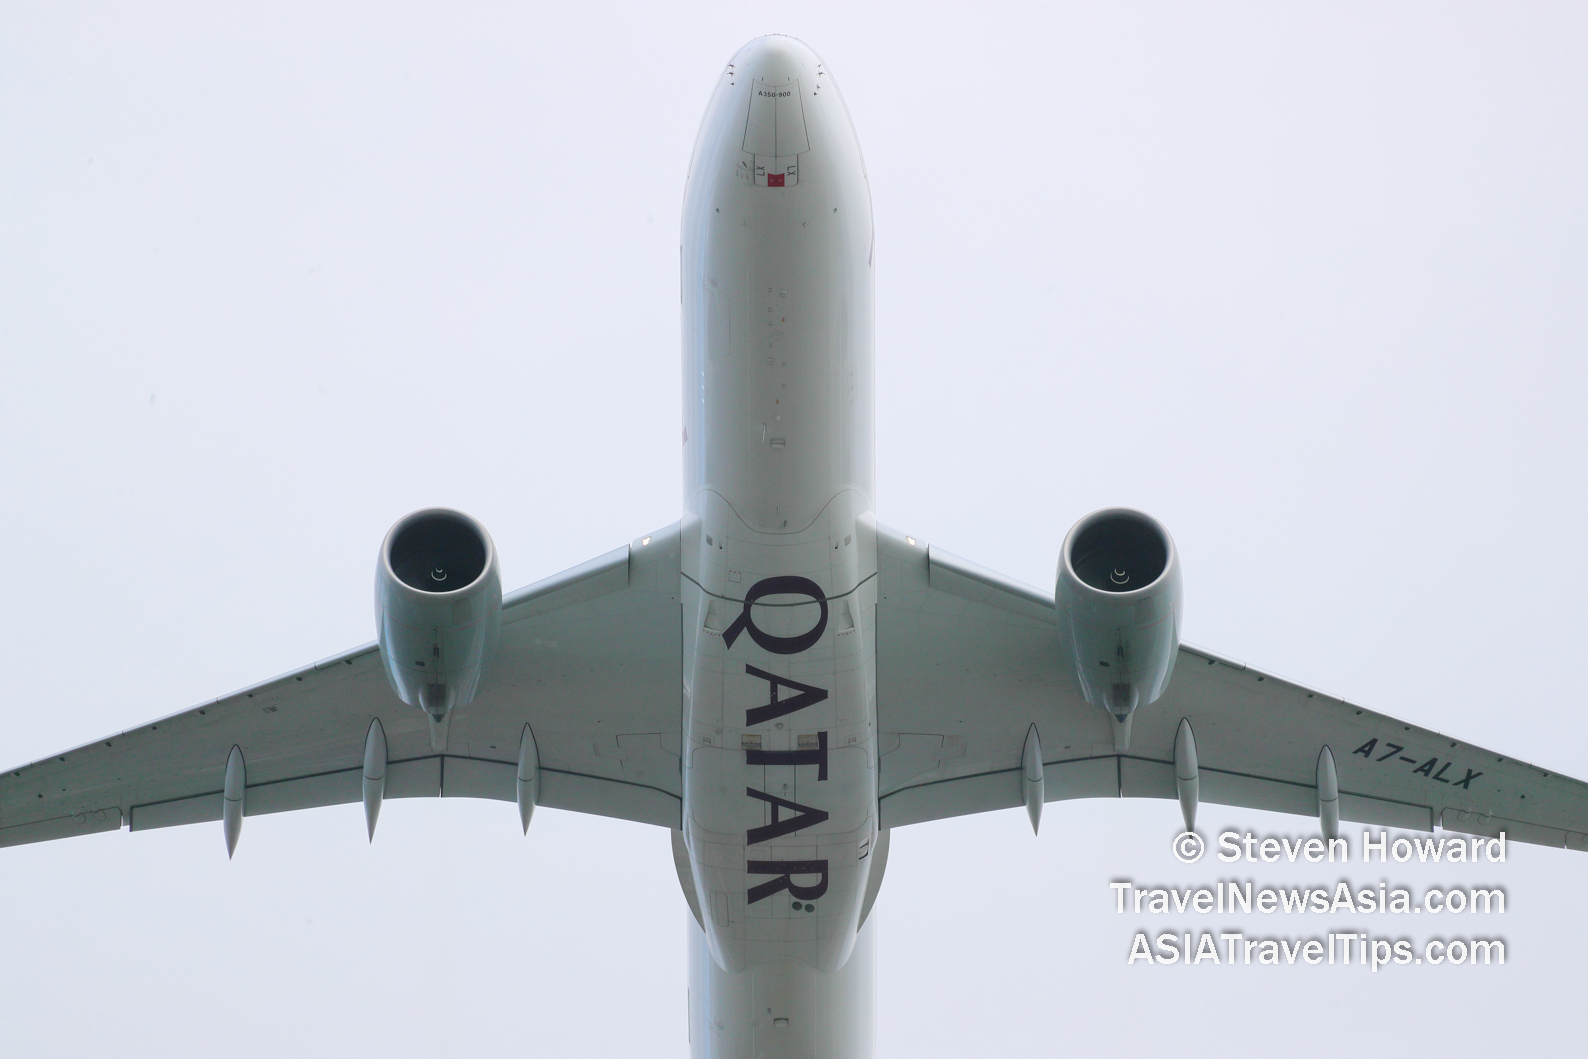 Qatar Airways Airbus A350-900 reg: A7-ALX. Picture by Steven Howard of TravelNewsAsia.com Click to enlarge.